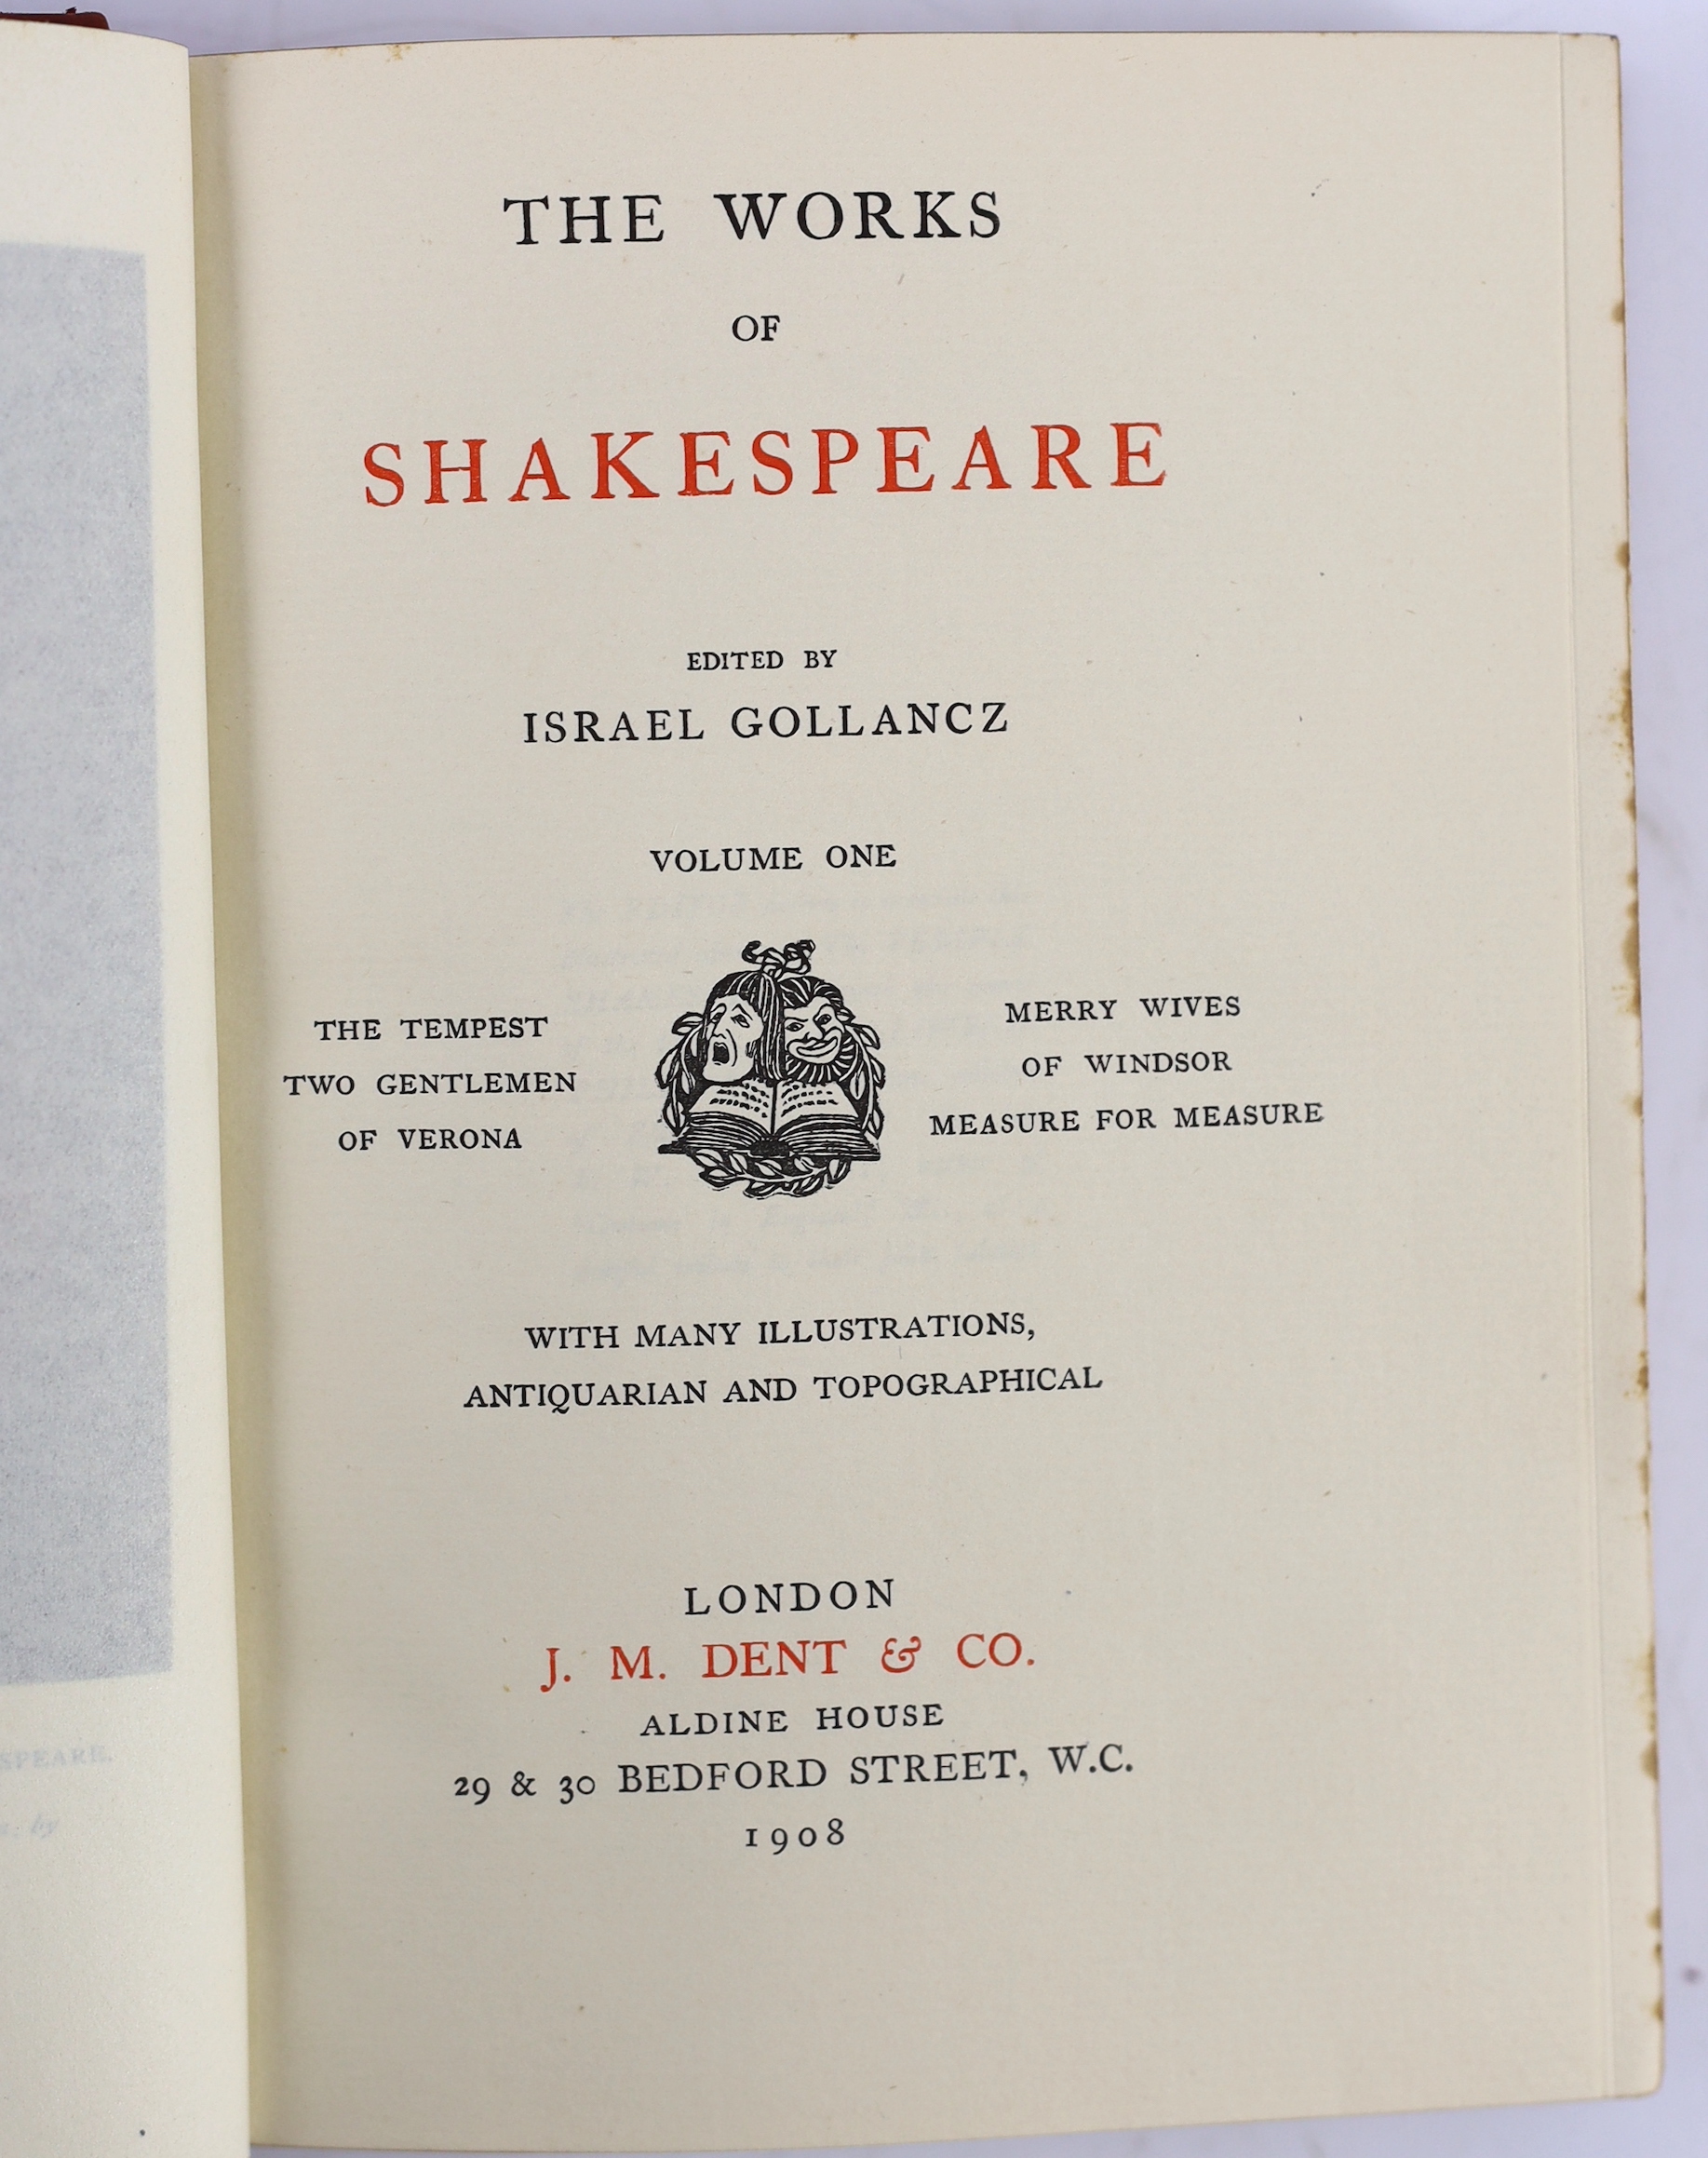 Shakespeare, William - The Works of ..., edited by Israel Gollancz, 12 vols, the large Temple Shakespeare Edition. earlier 20th century frontispieces (some coloured) and other illus.